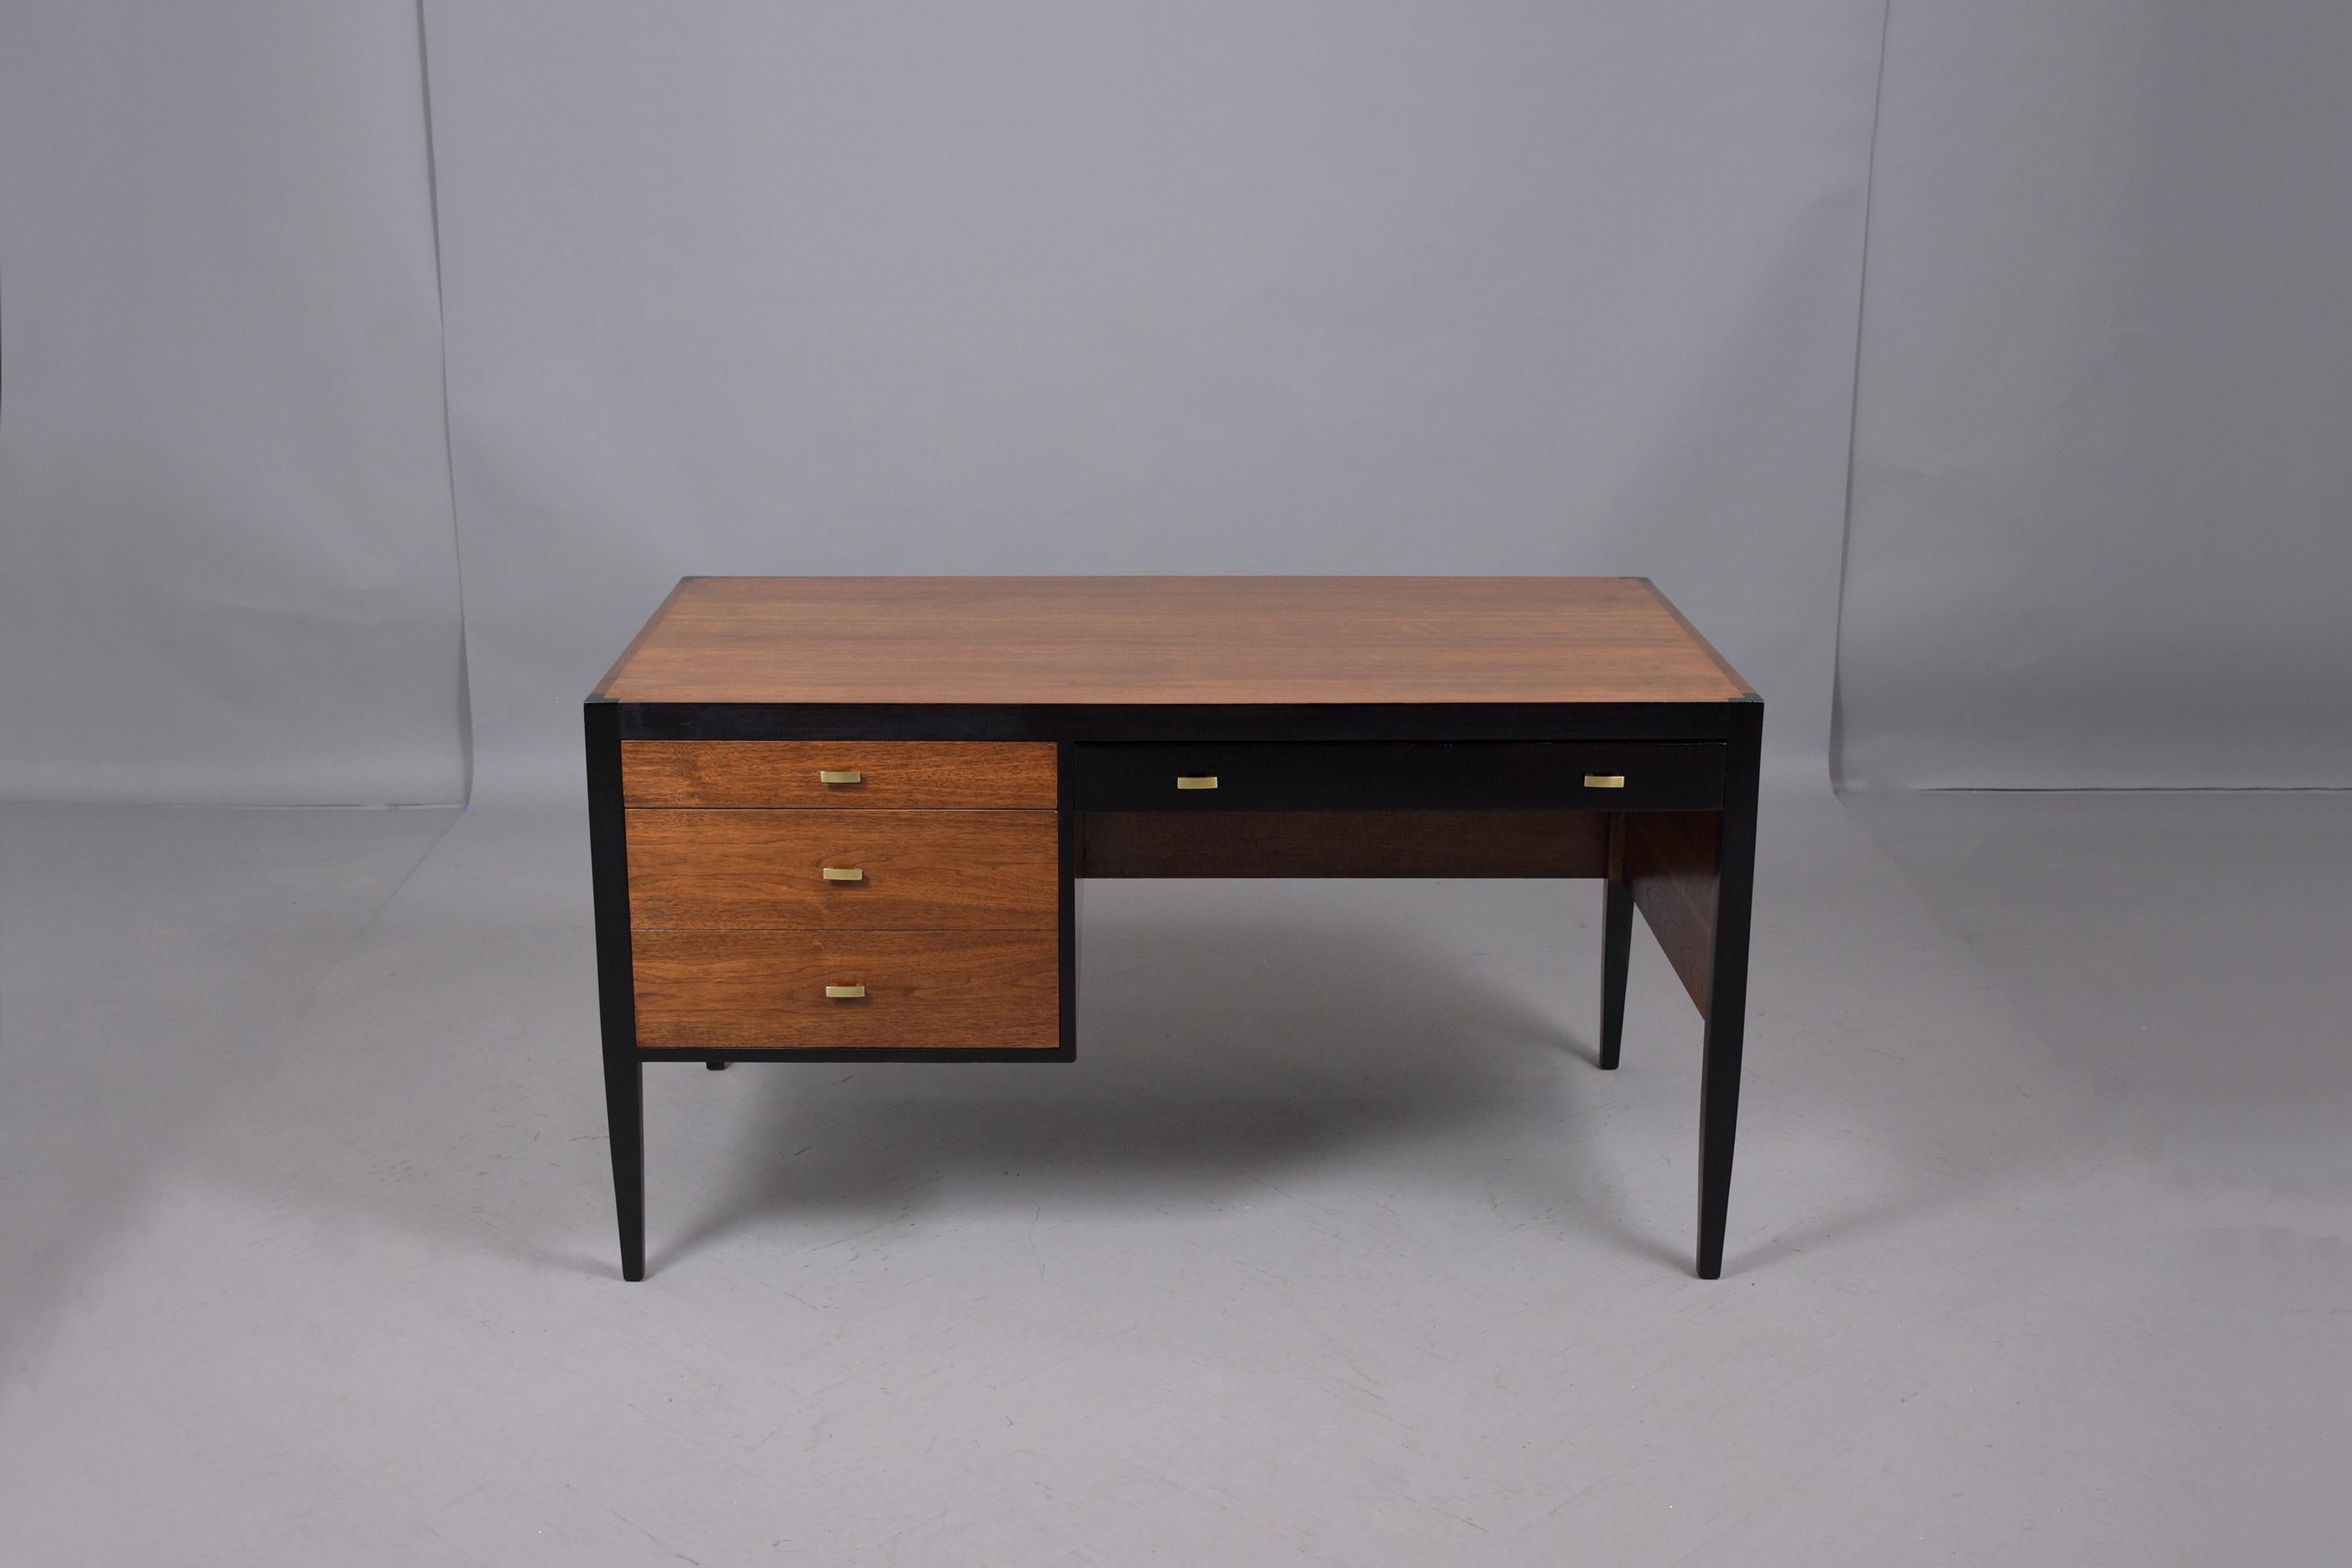 This sleek vintage mid-century modern desk has been professionally restored and features a newly stained walnut and ebonized color combination with a semi-gloss lacquered finish. The desk comes with three drawers with brass pulls that all open with